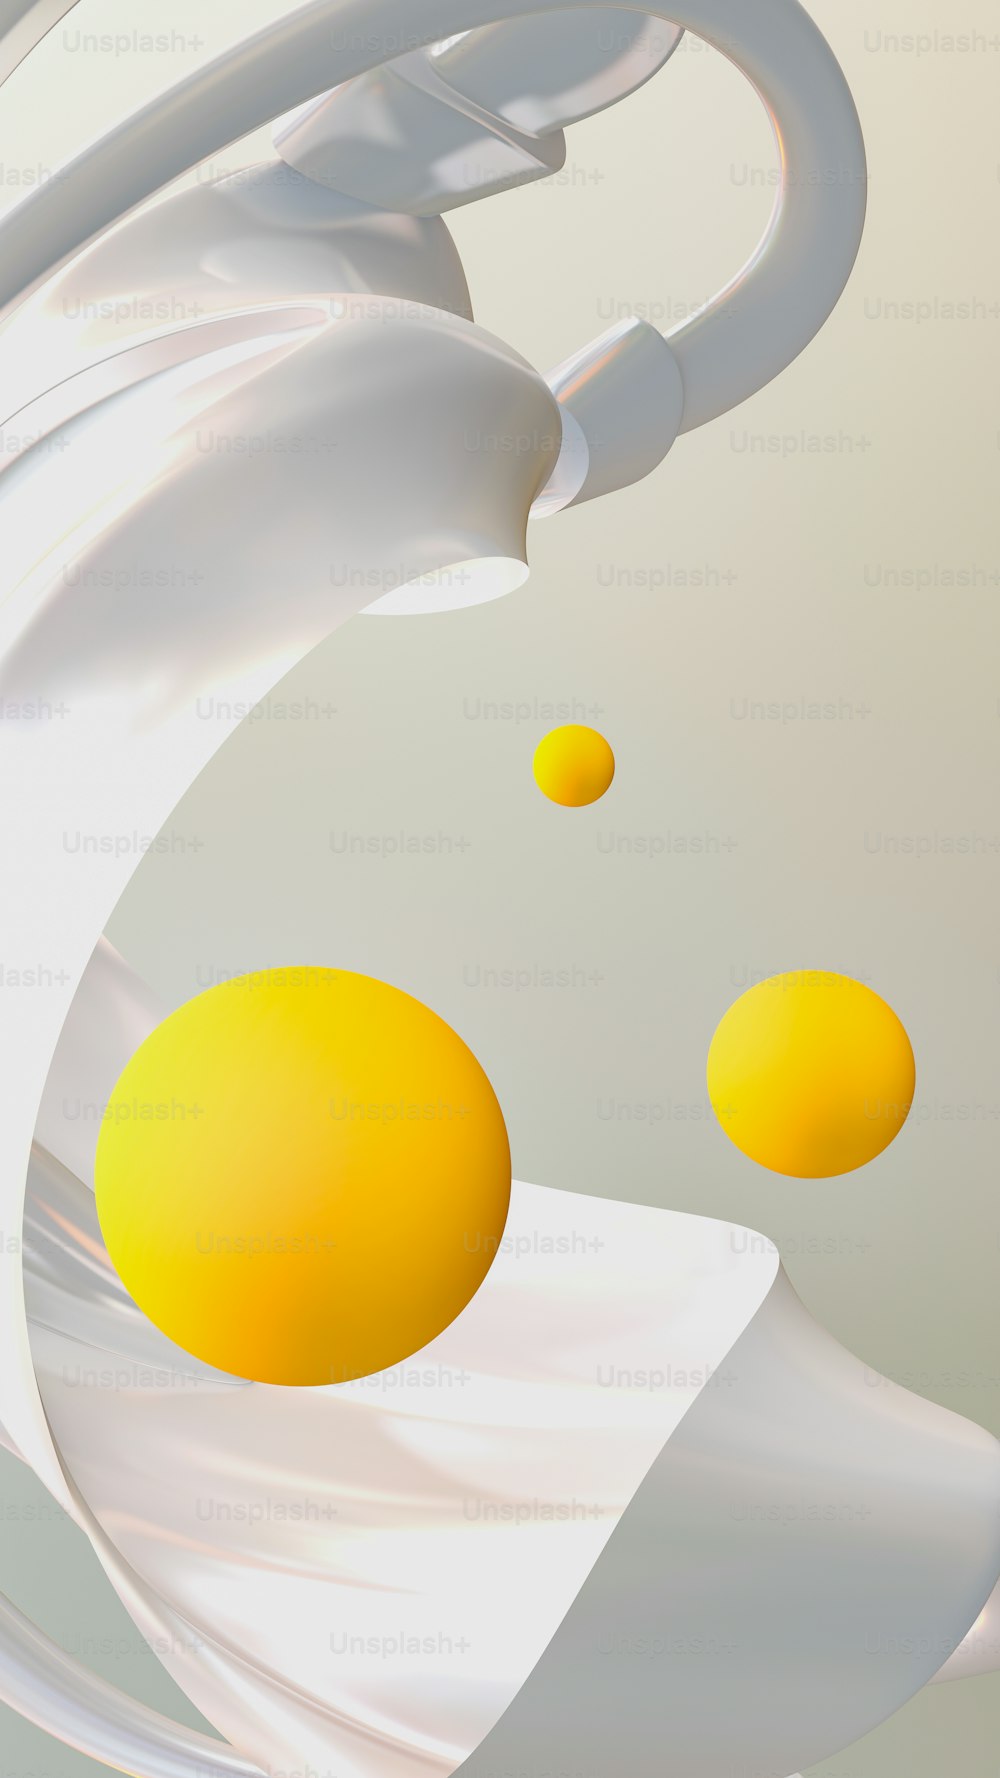 a computer generated image of a white and yellow object